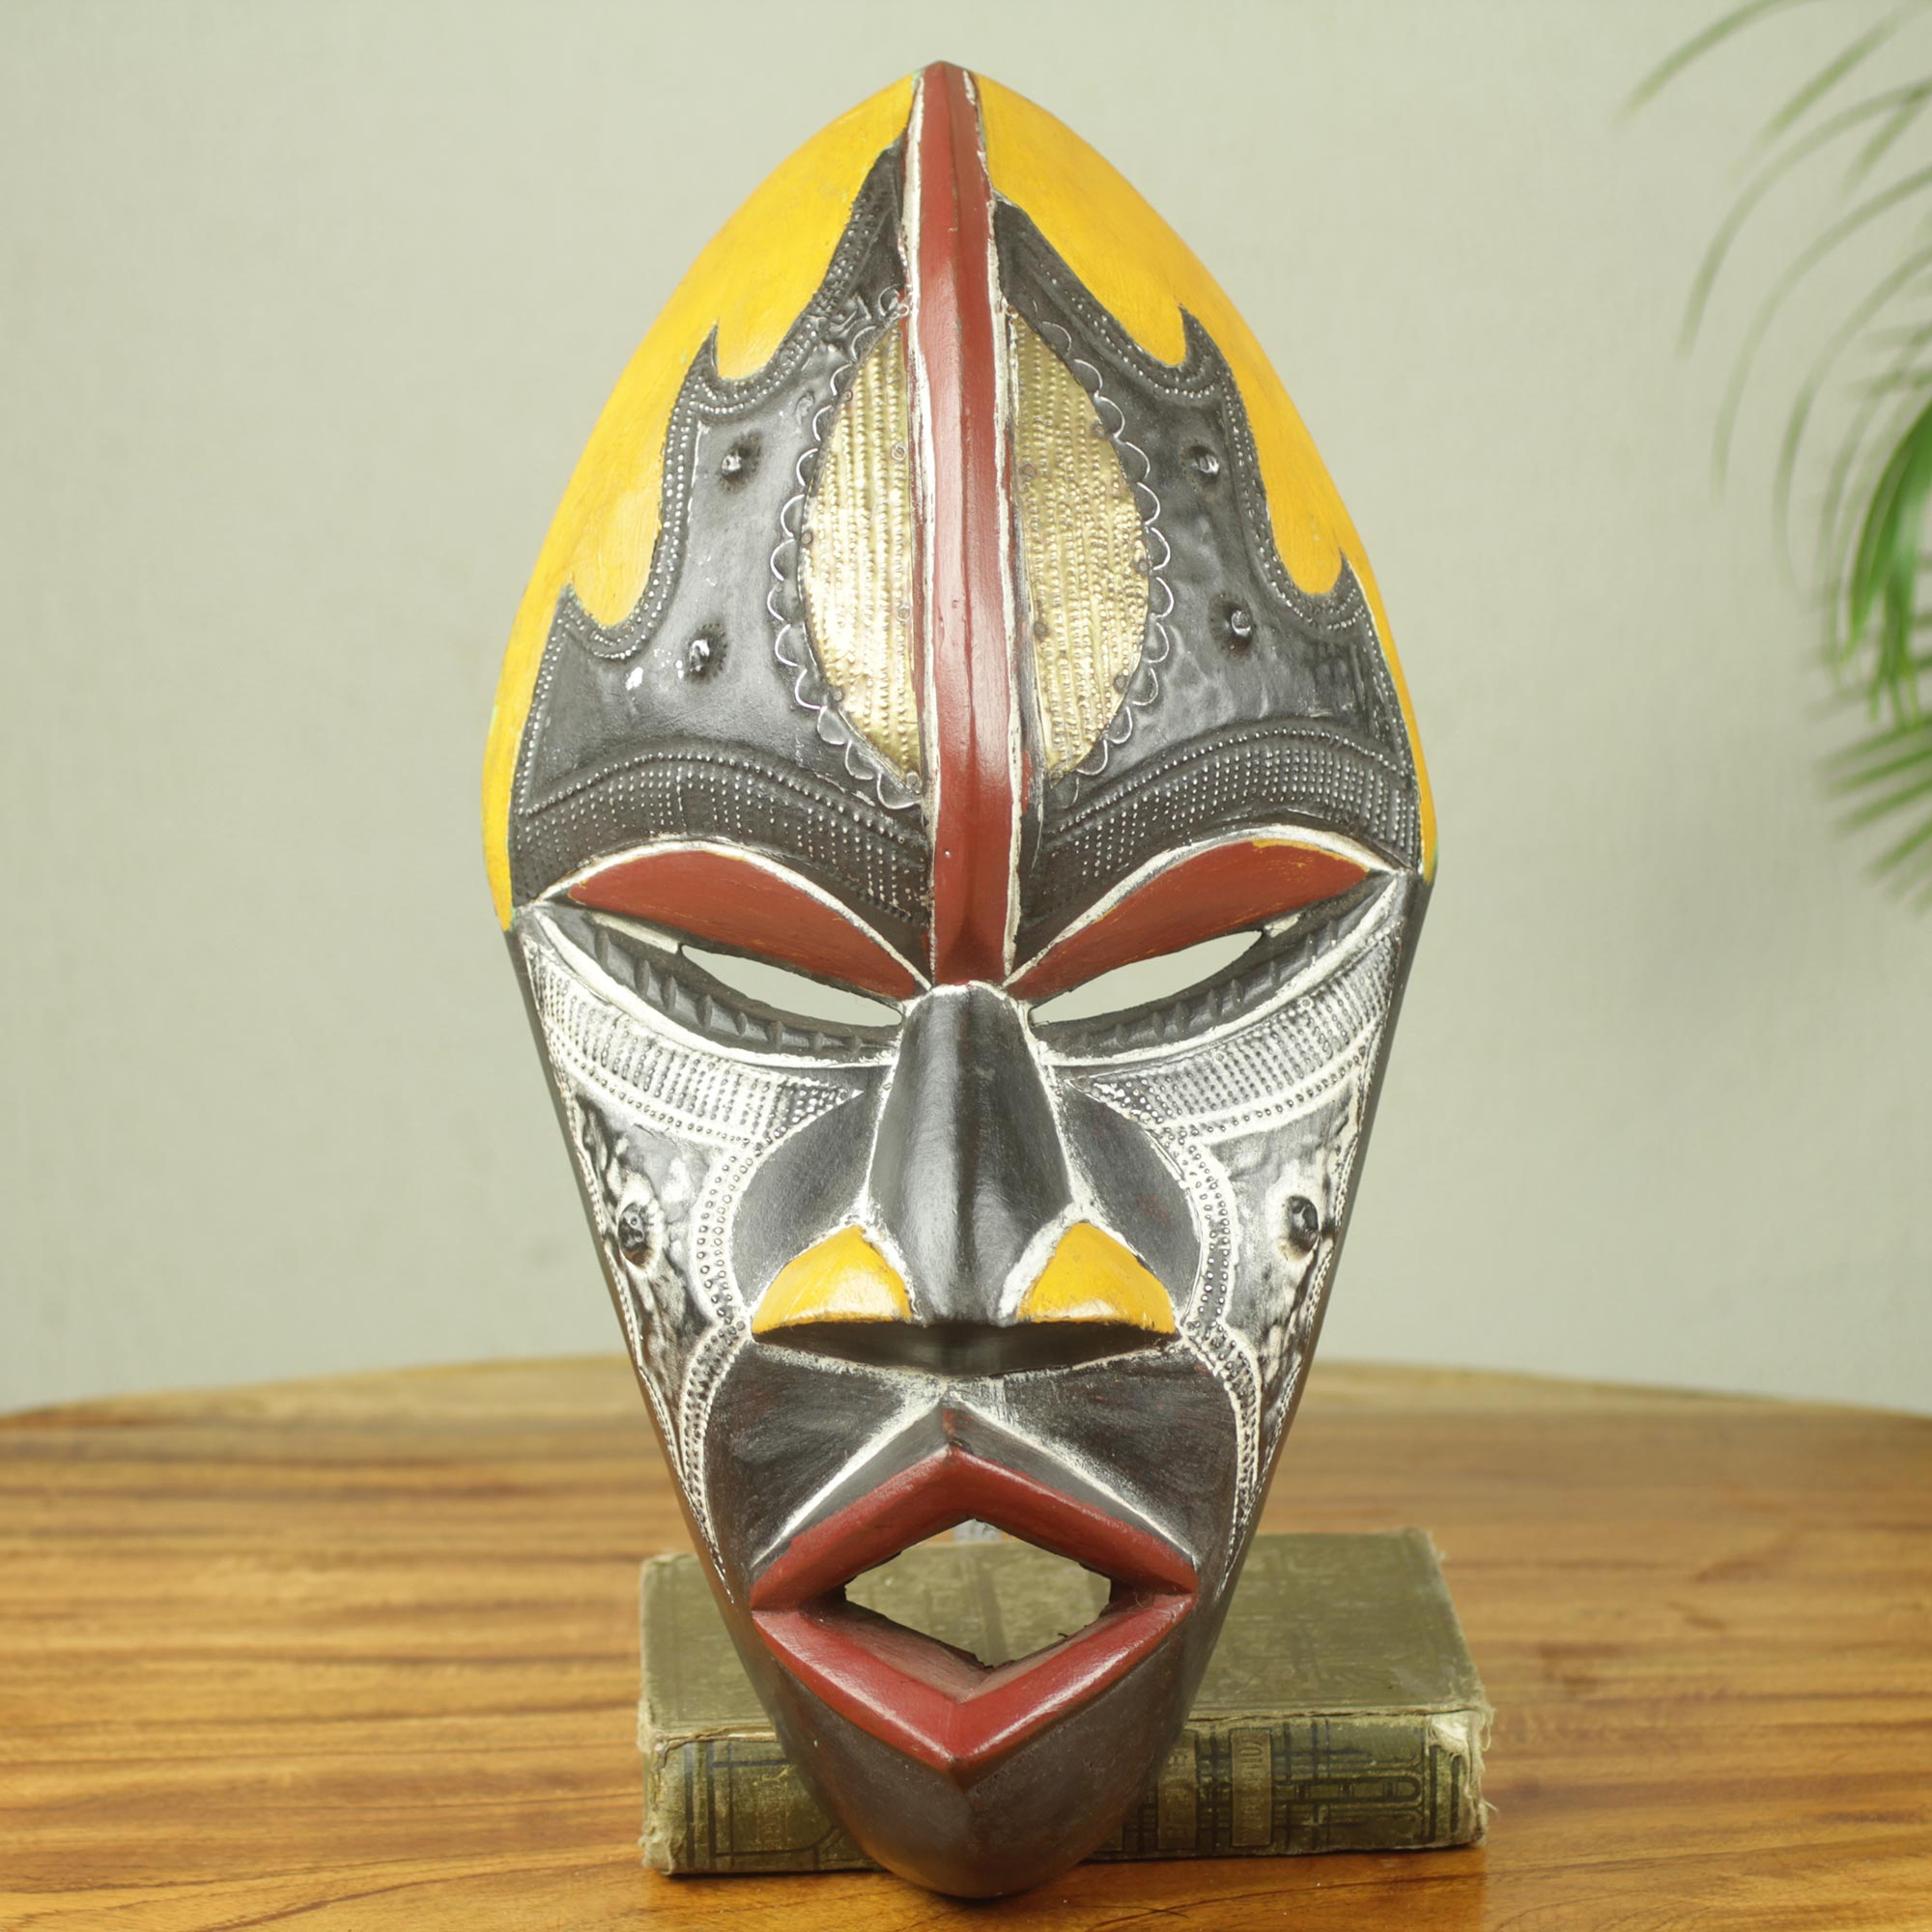 Colorful Hand Carved and Painted Ghana African Mask - The Face of